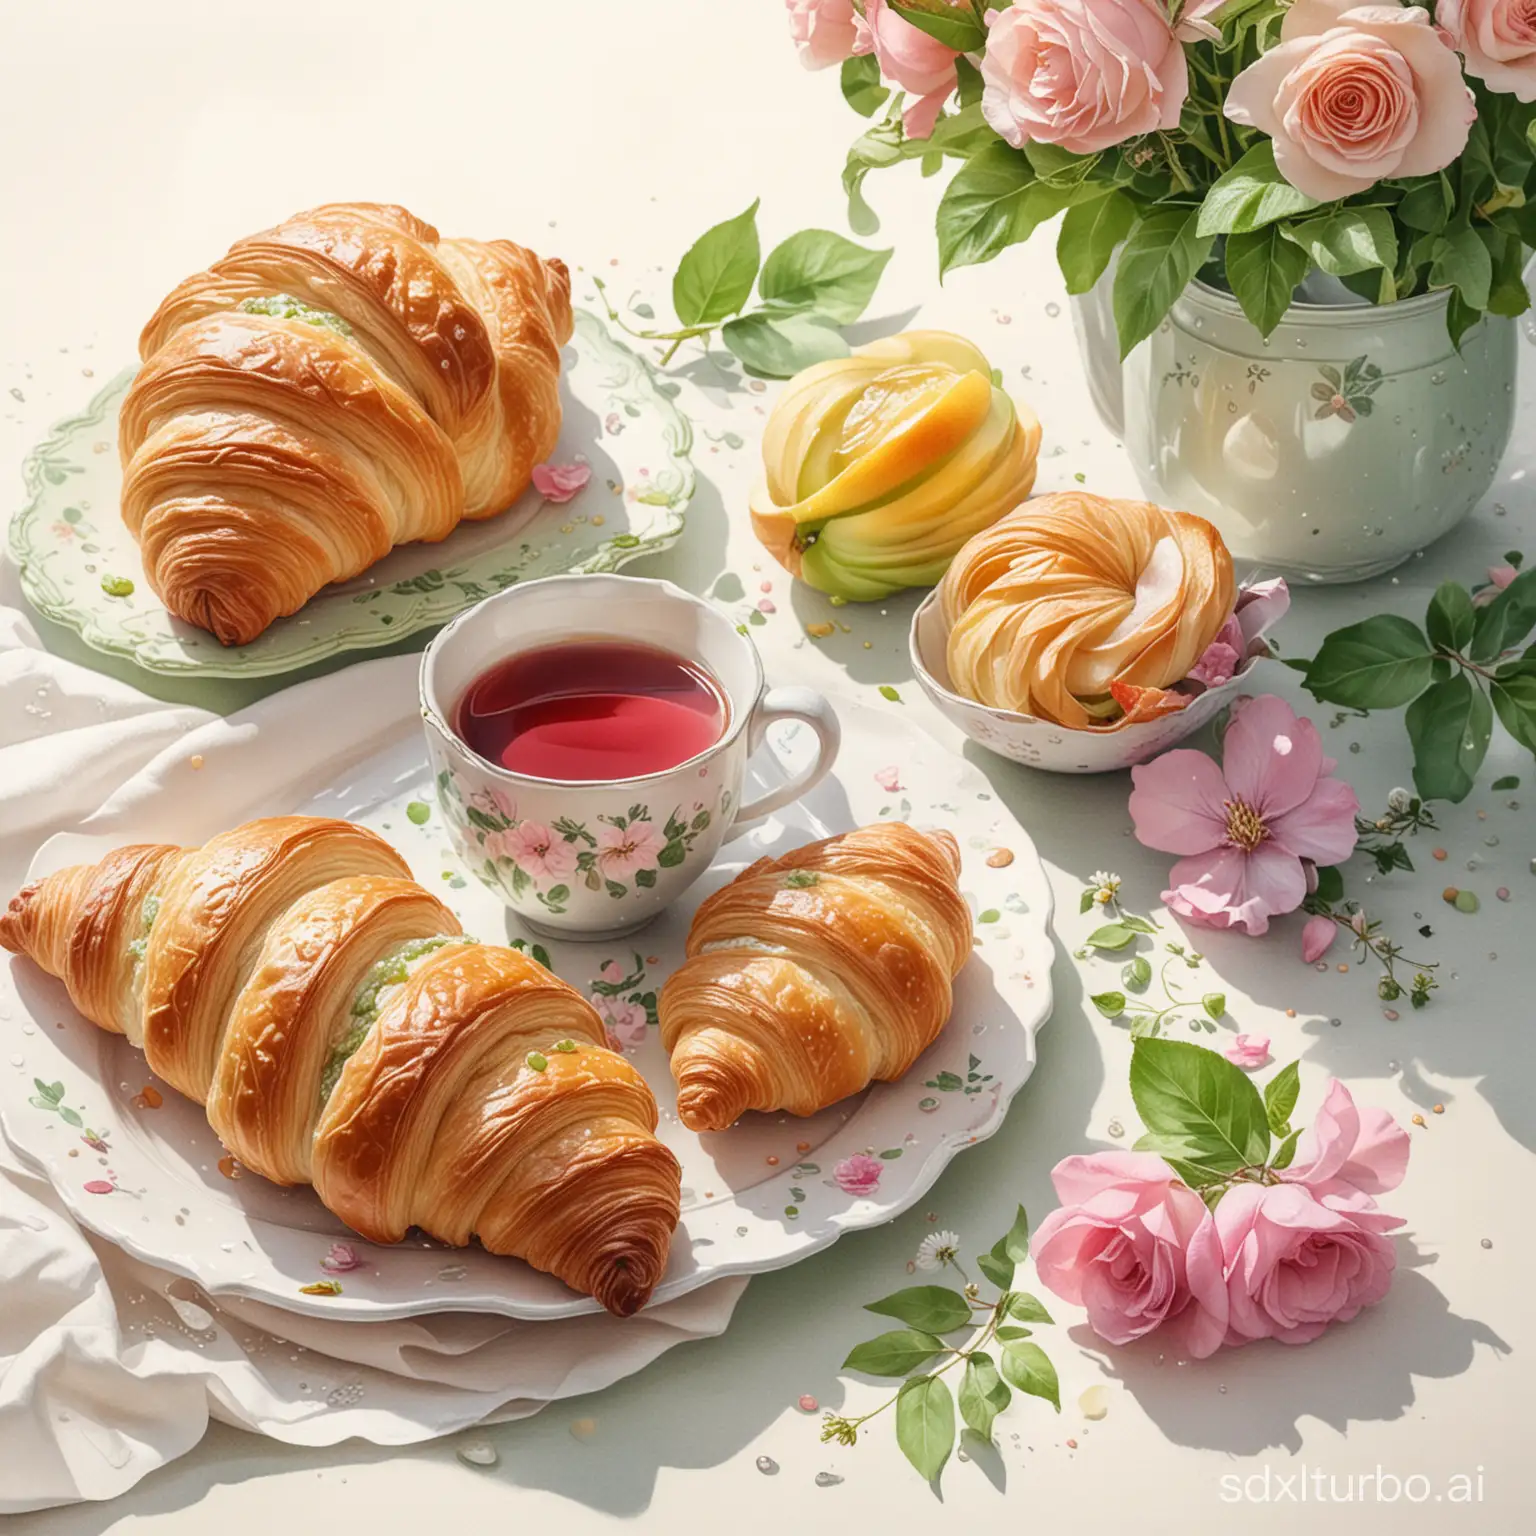 realistic food sketch ,vintage, gently, water drops, sweet  apple  croissant puff pastry with jam and a cup of tea, flowers, spring, sun, Light Taupe, Verdepeche, Rose Quartz tones, shades of green, light green, sun,watercolor pencil drawing, double exposure, bottom view, fantasy, sketching, ink, watercolor detailed deep drawing,